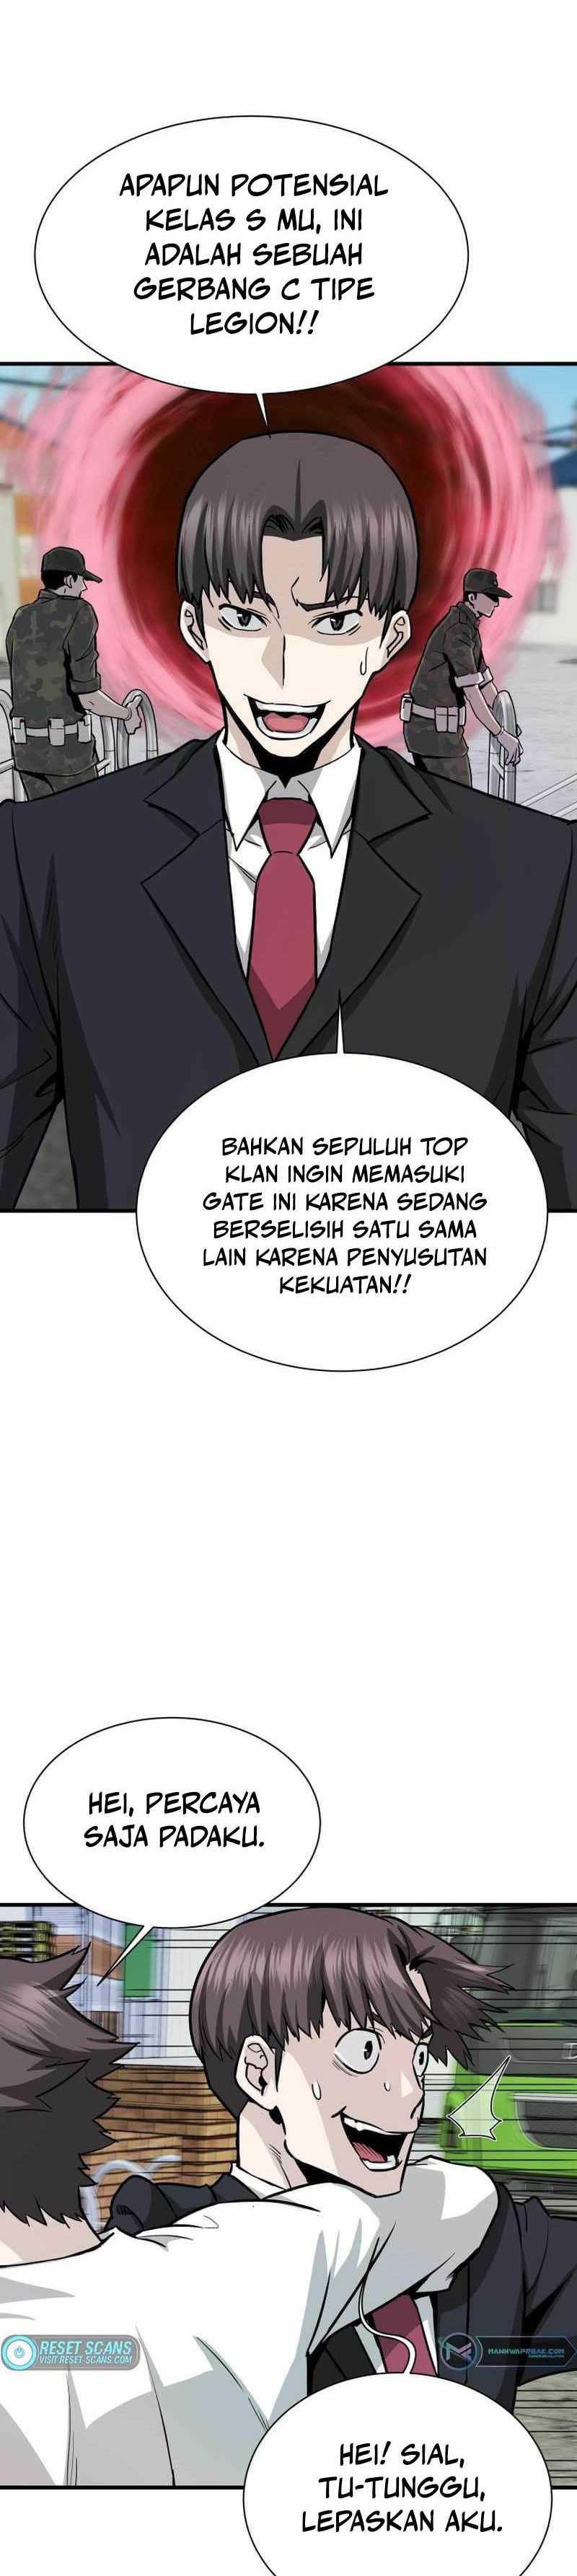 Han Dae Sung Returned From Hell Chapter 41 27